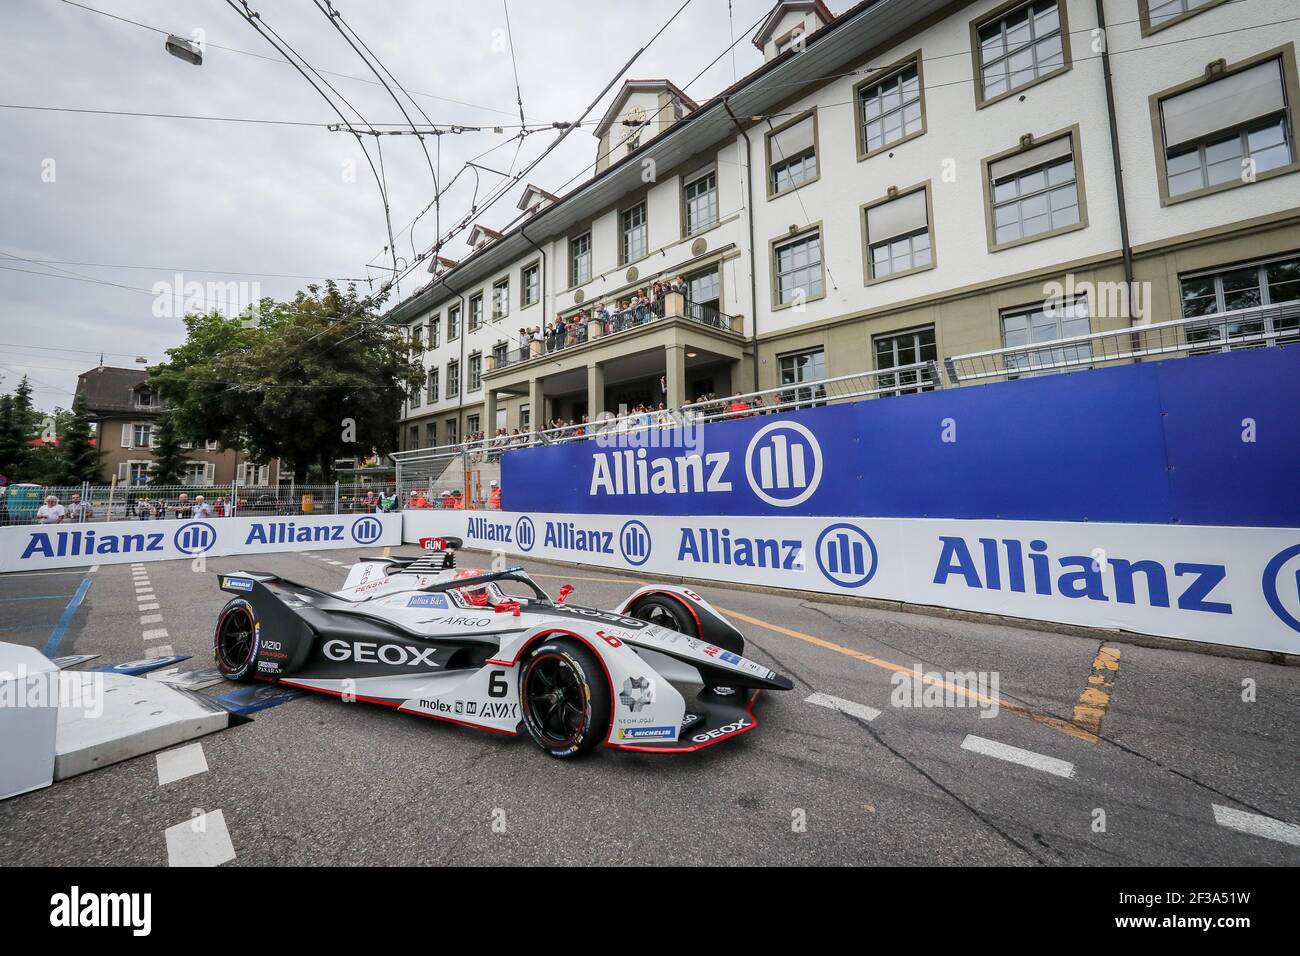 06 GUNTHER Maximilian (ger), Penske EV-3 team Geox Racing, action during the 2019 Formula E championship, at Berne, Switzerland from june 20 to 22 - Photo Alexandre Guillaumot / DPPI Stock Photo